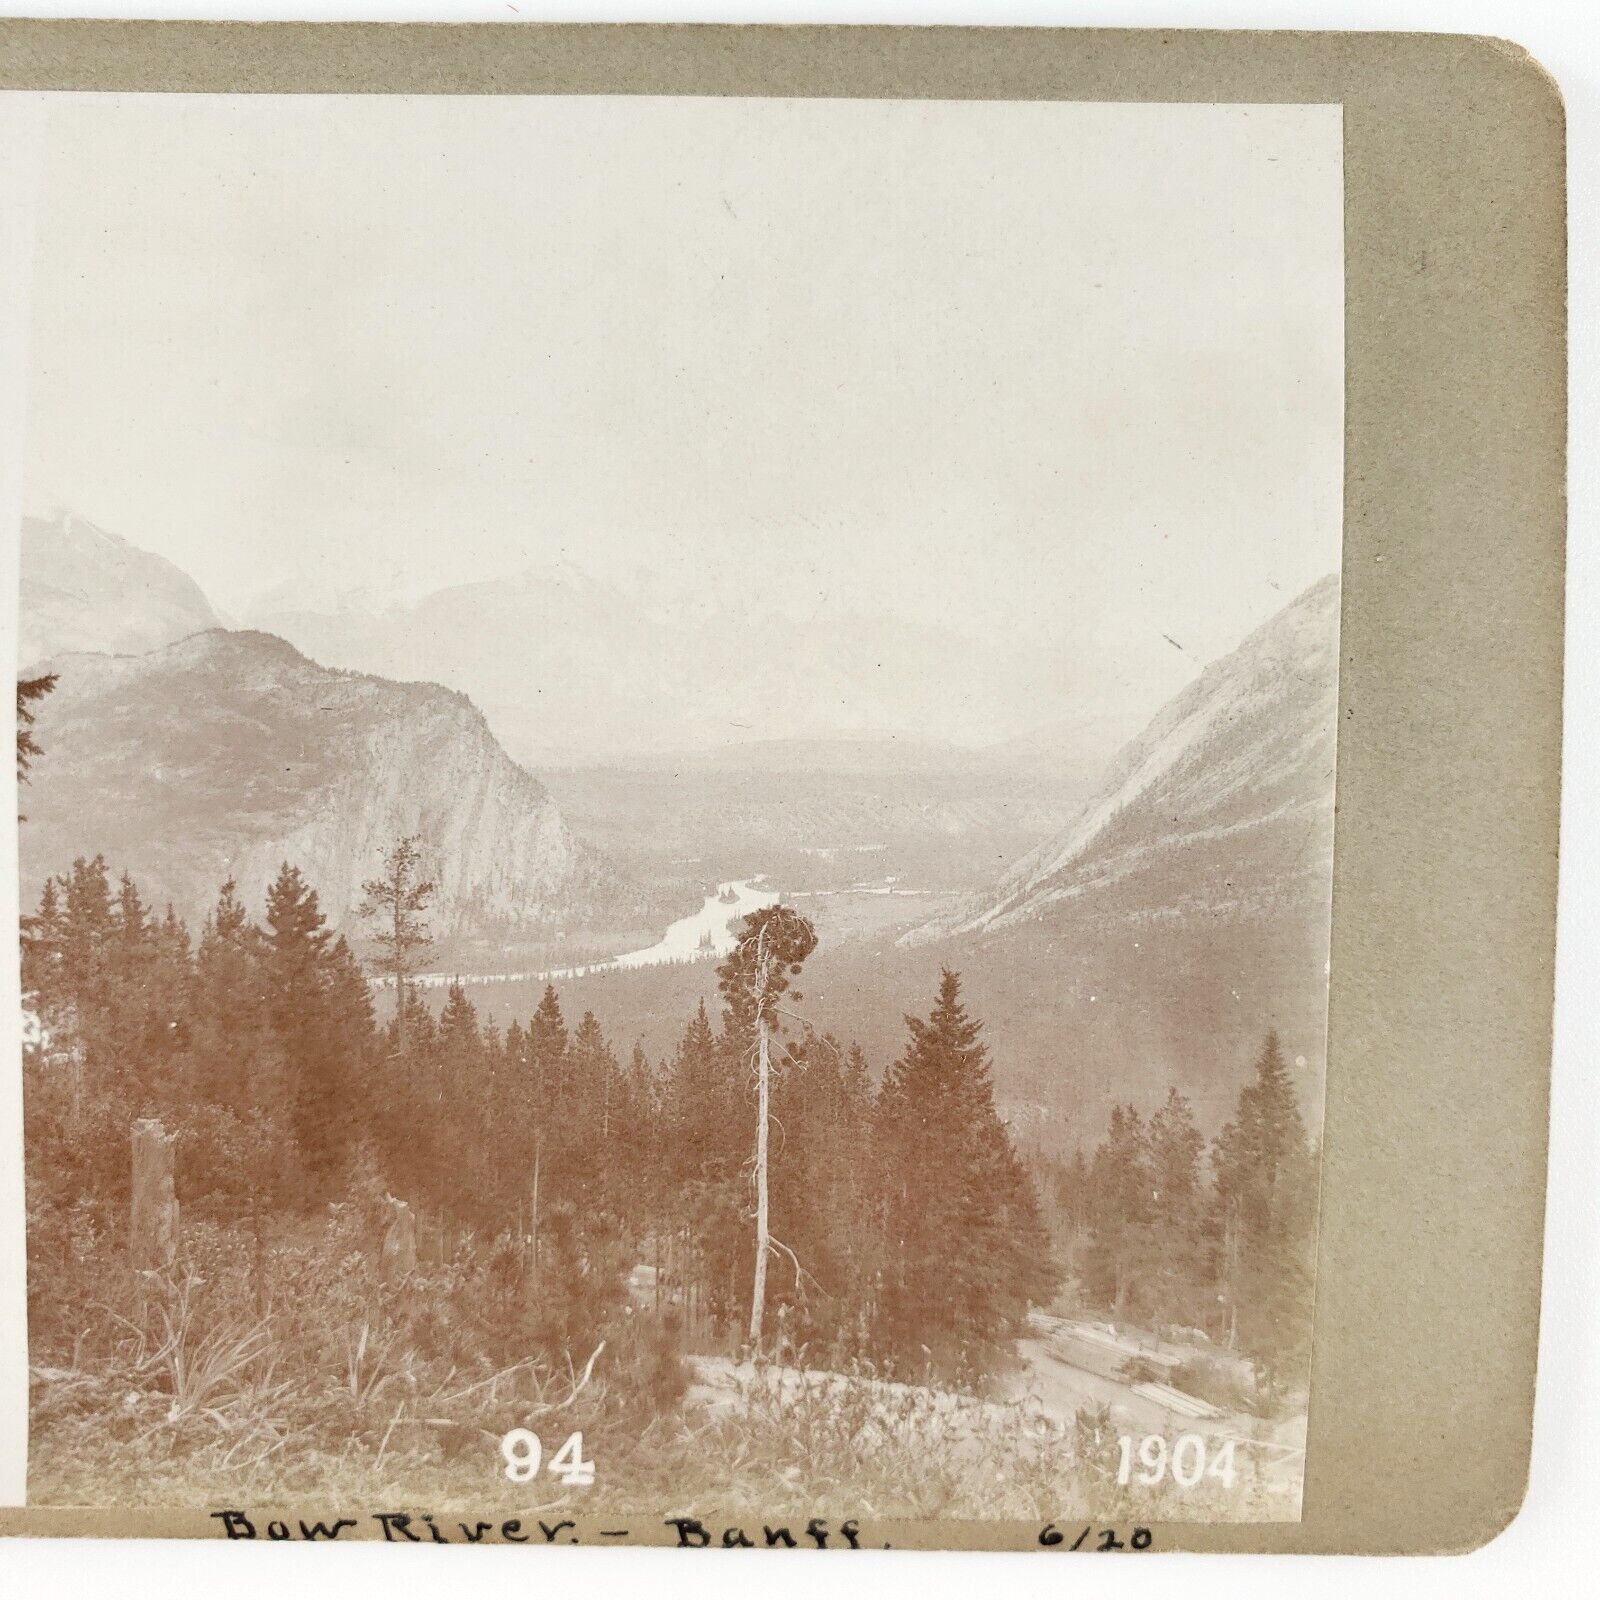 Bow River Banff Park Stereoview c1904 Canada National Park Forest Trees B1994